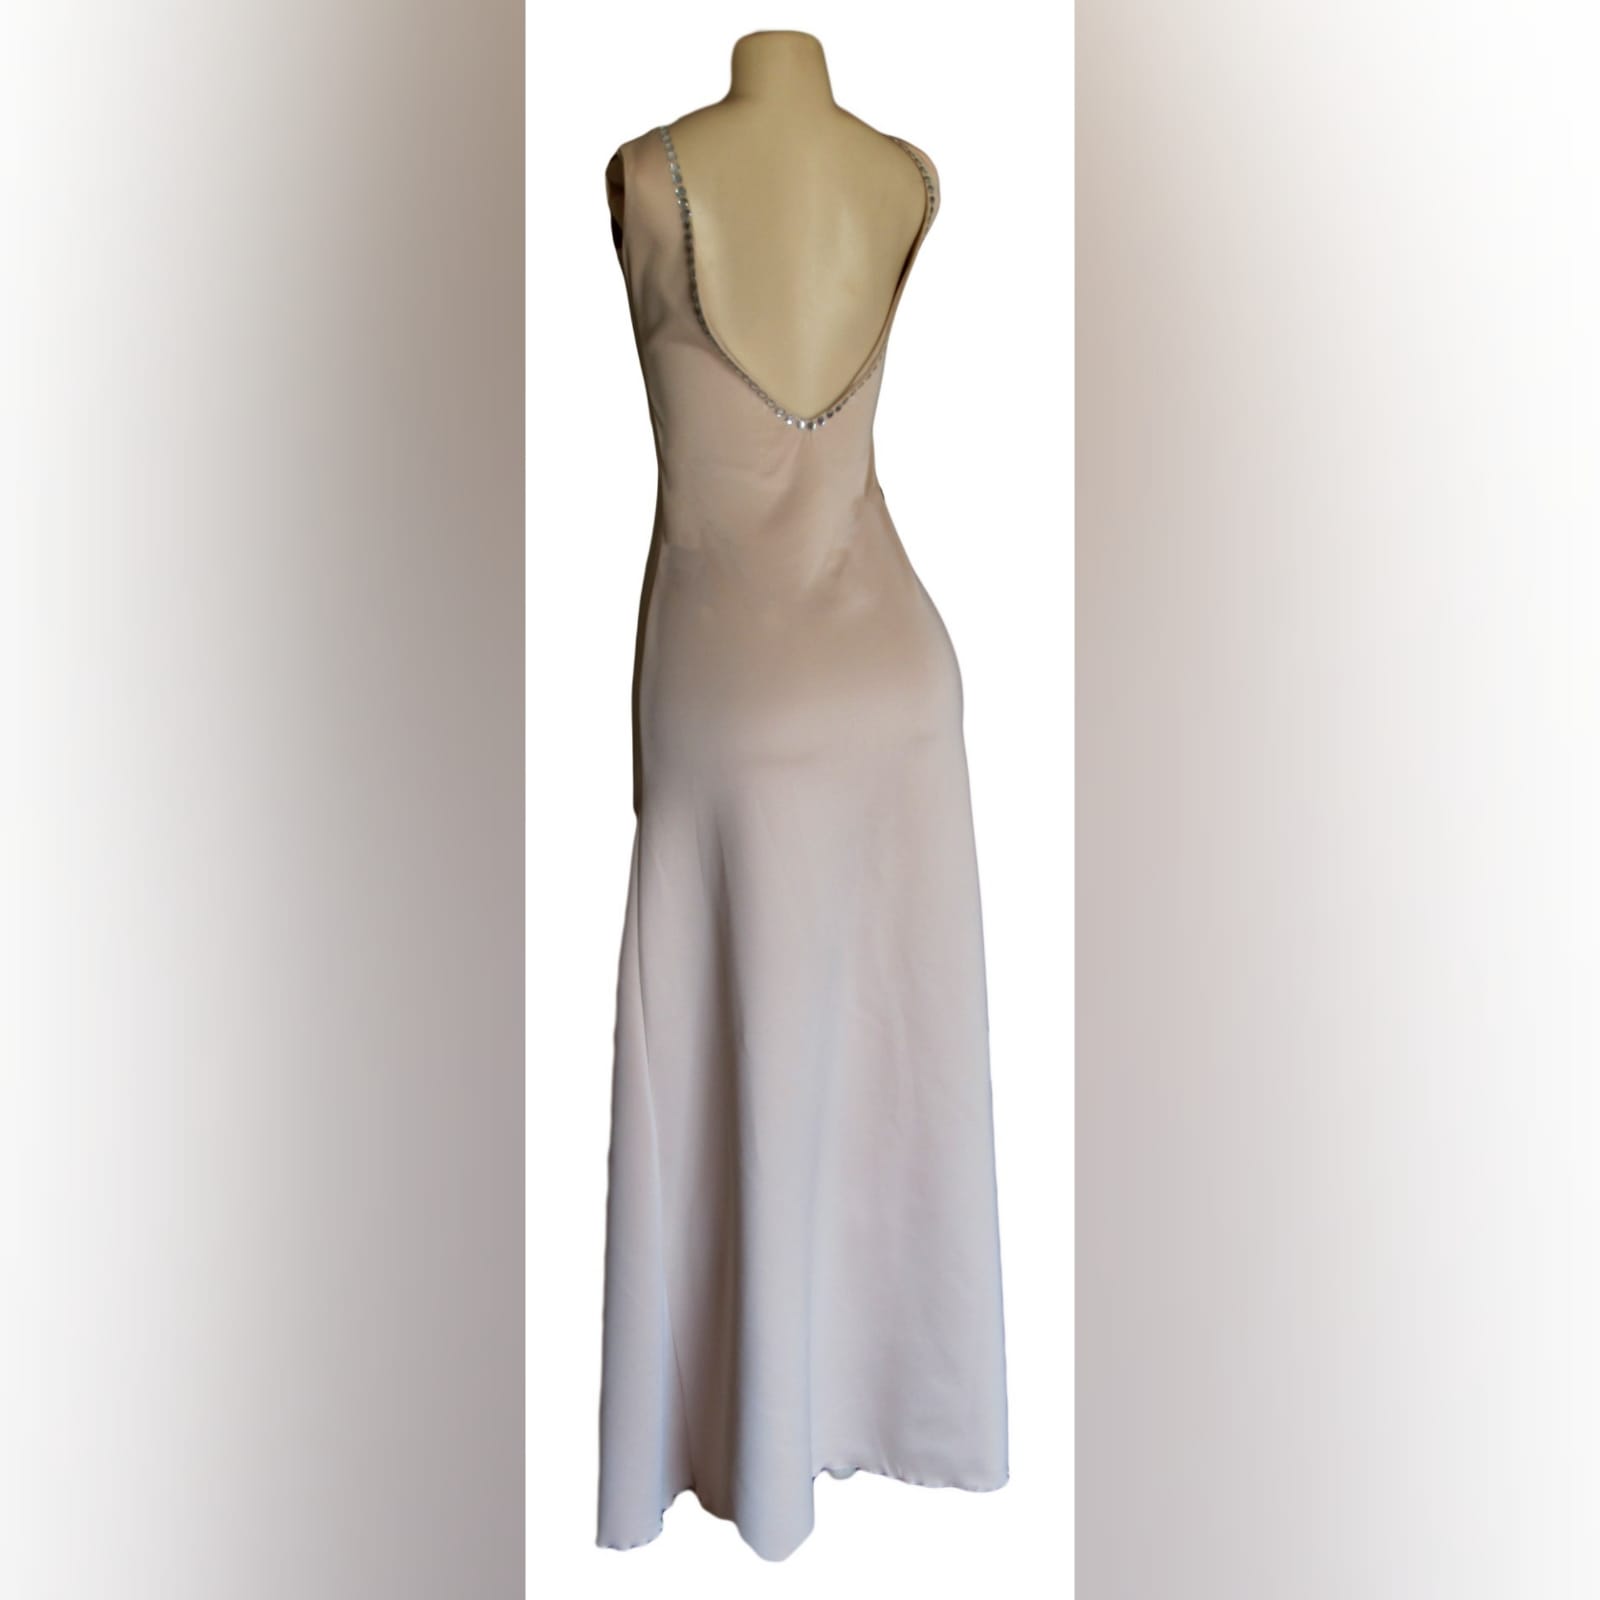 Nude simple elegant formal dress 4 nude simple elegant formal dress with a sweetheart neckline and a low rounded open back. Detailed with silver beads and a slit.